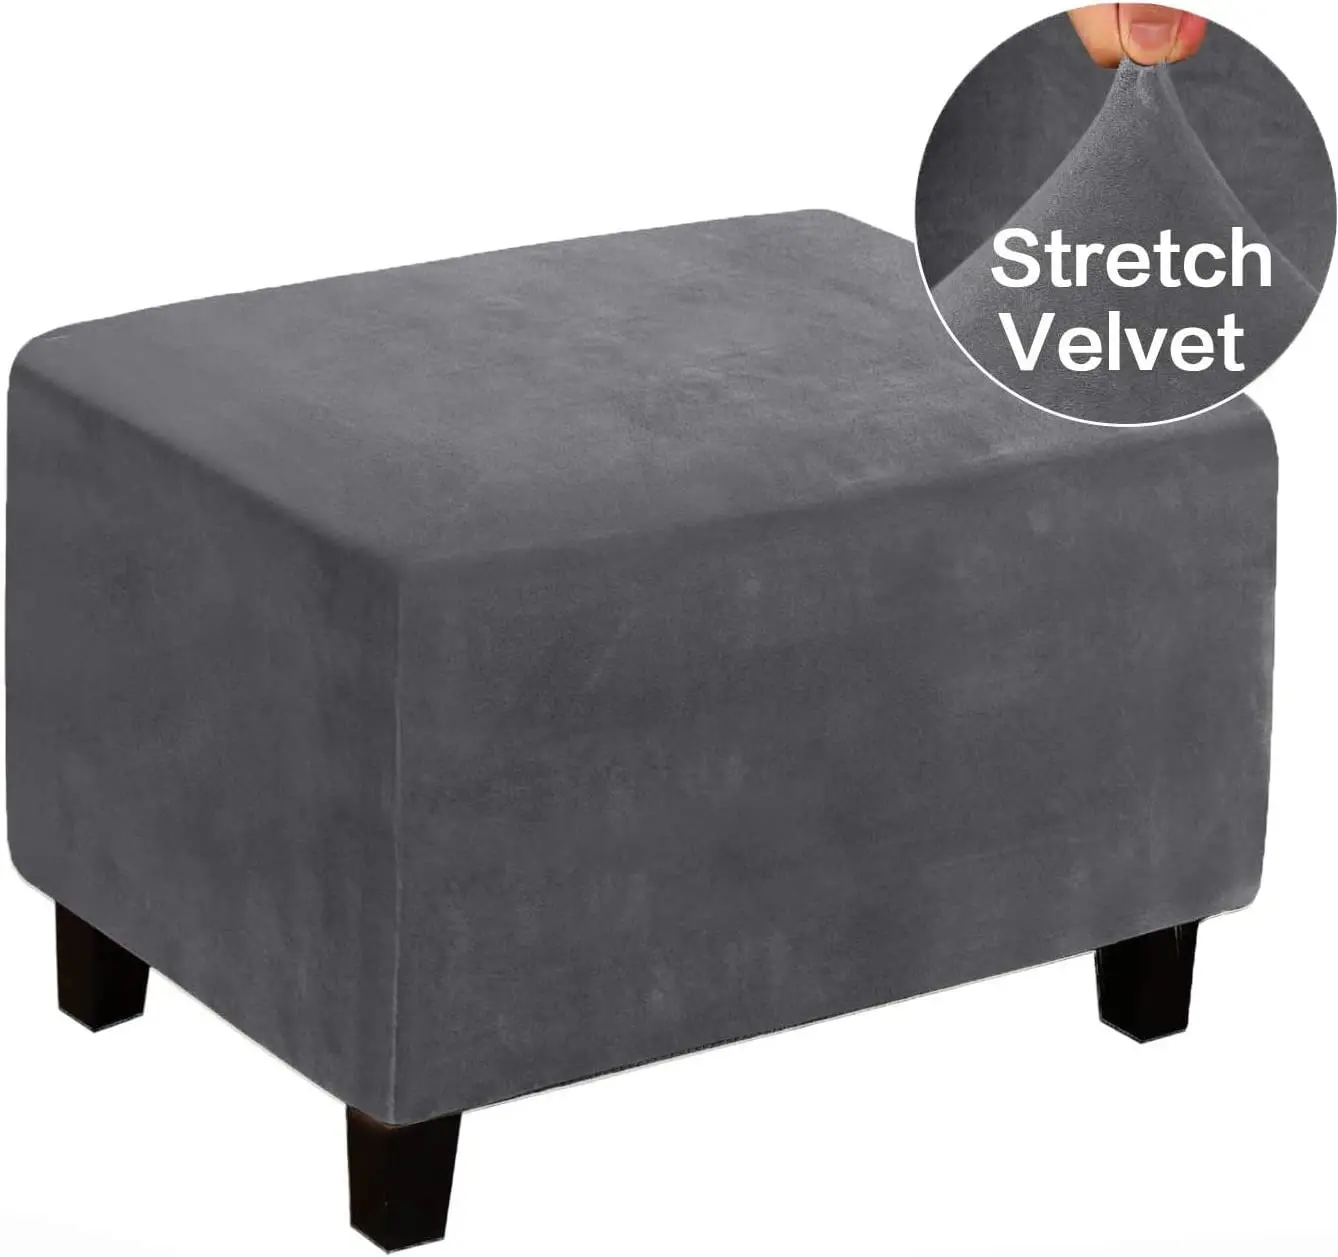 Velvet Ottoman Cover Slipcovers Rectangle Foot Stool Covers Stretch Ottoman Footrest Covers Folding Storage Footstool Protector